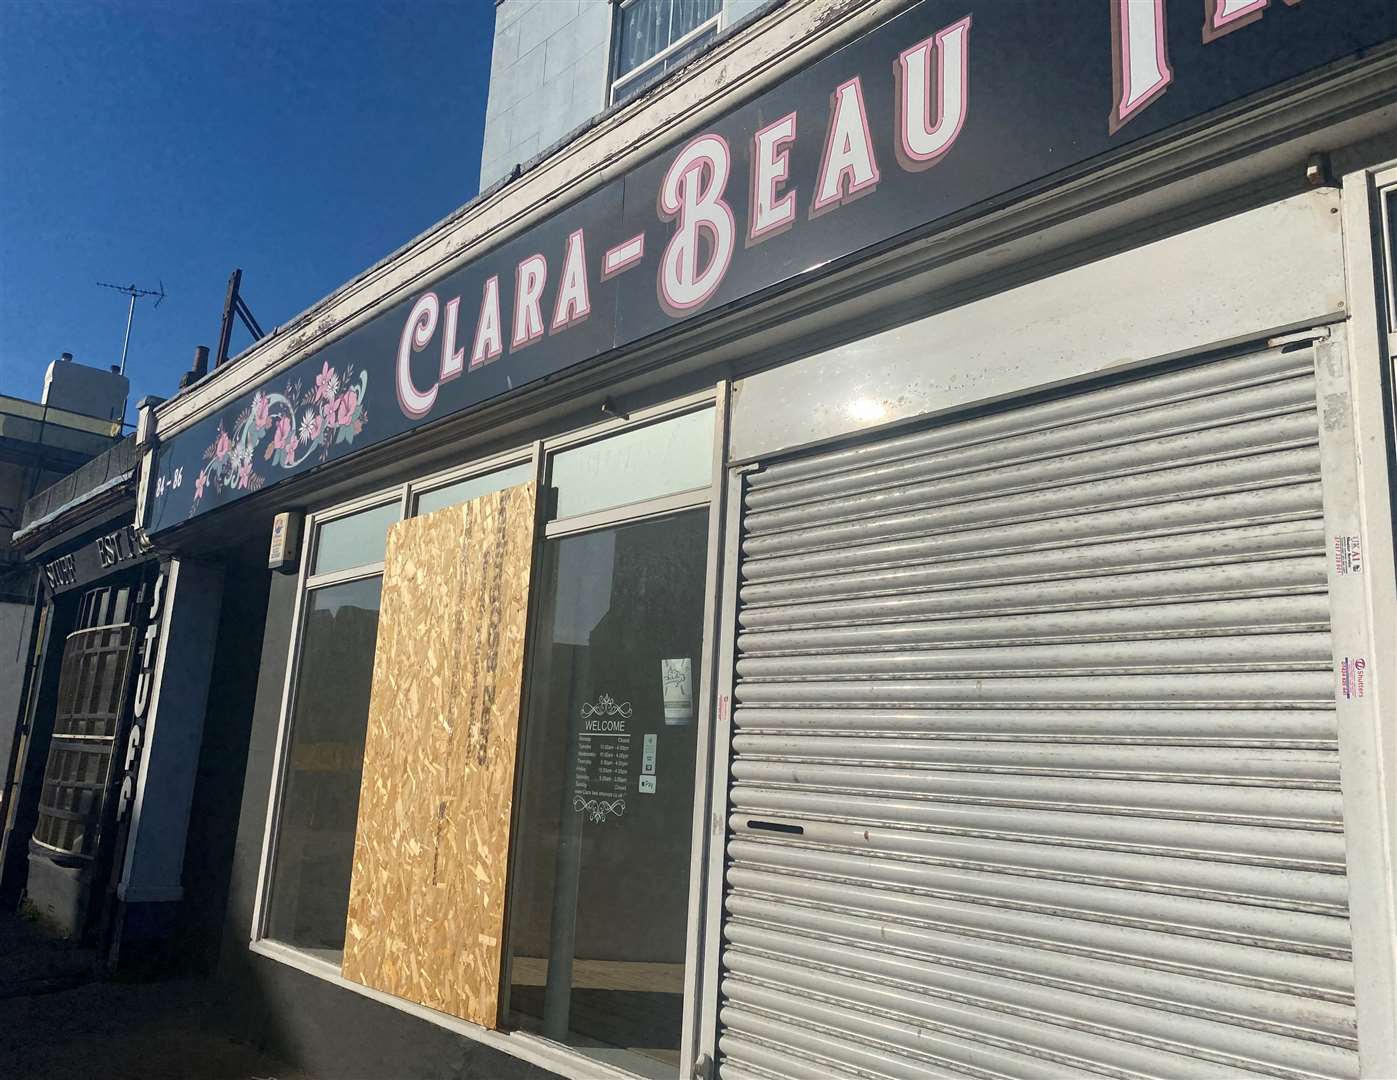 Clara-Beau Interiors closed after two years in the town – with the owner blaming parking and traffic issues